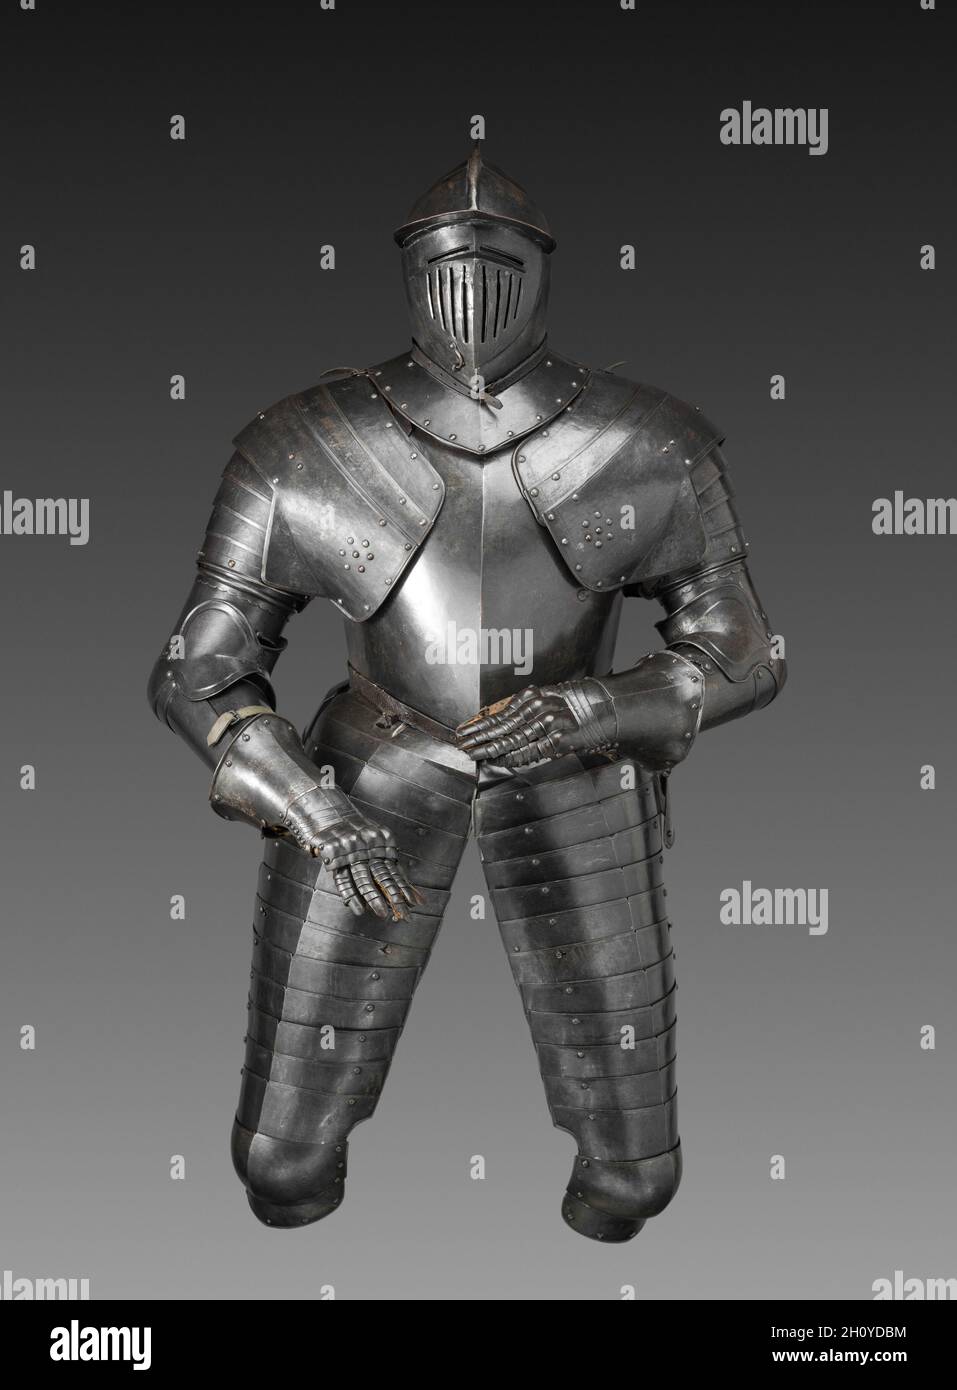 Cuirassier's Armor, c. 1600–20. Austria, Graz(?), early 17th century. Steel (originally blued, now black); leather straps; overall: 171.4 cm (67 1/2 in.).  The cuirassier was the heavy cavalryman of the late 1500s and early 1600s. Carrying pistols and a sword, he was clad in full armor, like this suit, with the exception of his lower legs, which were protected by heavy riding boots. Shortly after 1650, such heavy cavalry armor disappeared from use. By then, European cavalries had abandoned full armor as impractical against the increased sophistication of firearms. Similar armors survive in the Stock Photo